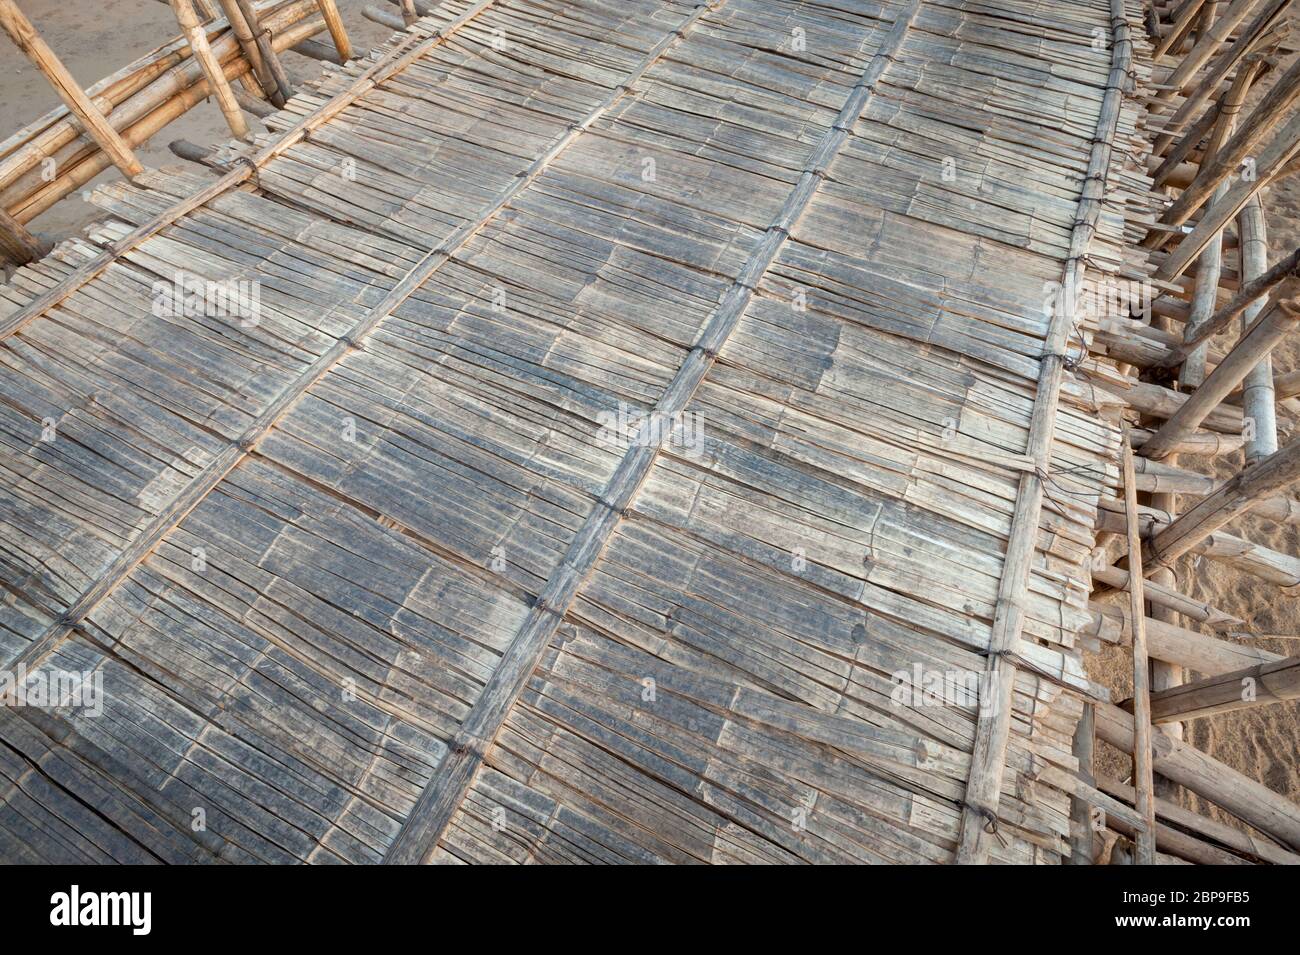 Bamboo bridge track over the Mekong River to Koh Penh. Cambodia, Southeast Asia Stock Photo